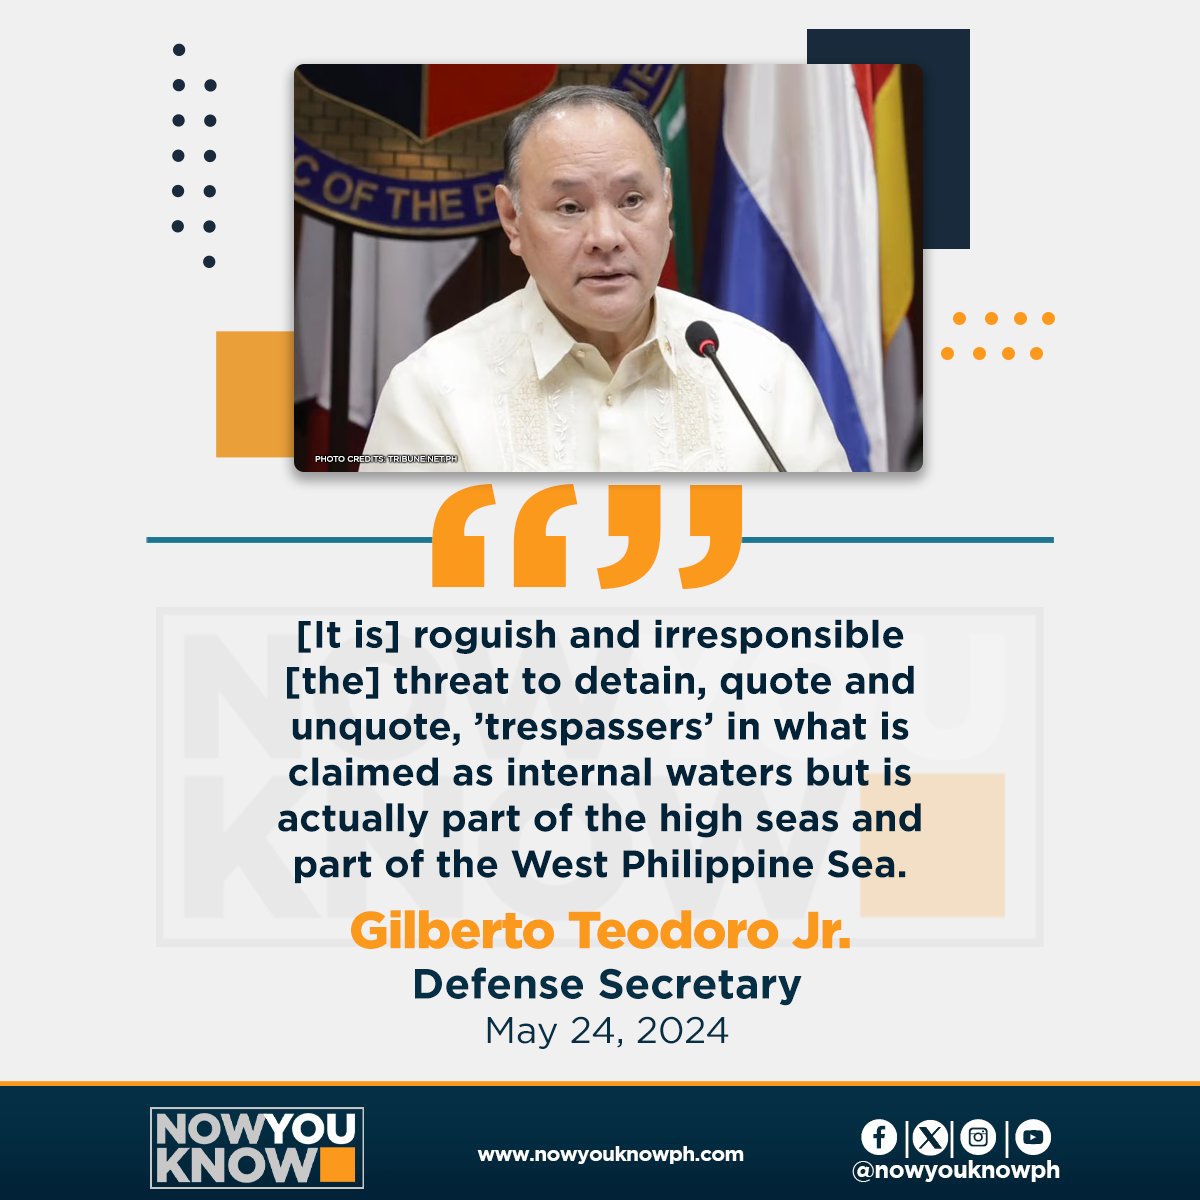 Defense Secretary Gilberto Teodoro Jr. on Friday called “roguish” and “irresponsible” Beijing’s anti-trespassing policy. READ: tinyurl.com/5xrfmuyt 📰Inquirer.net